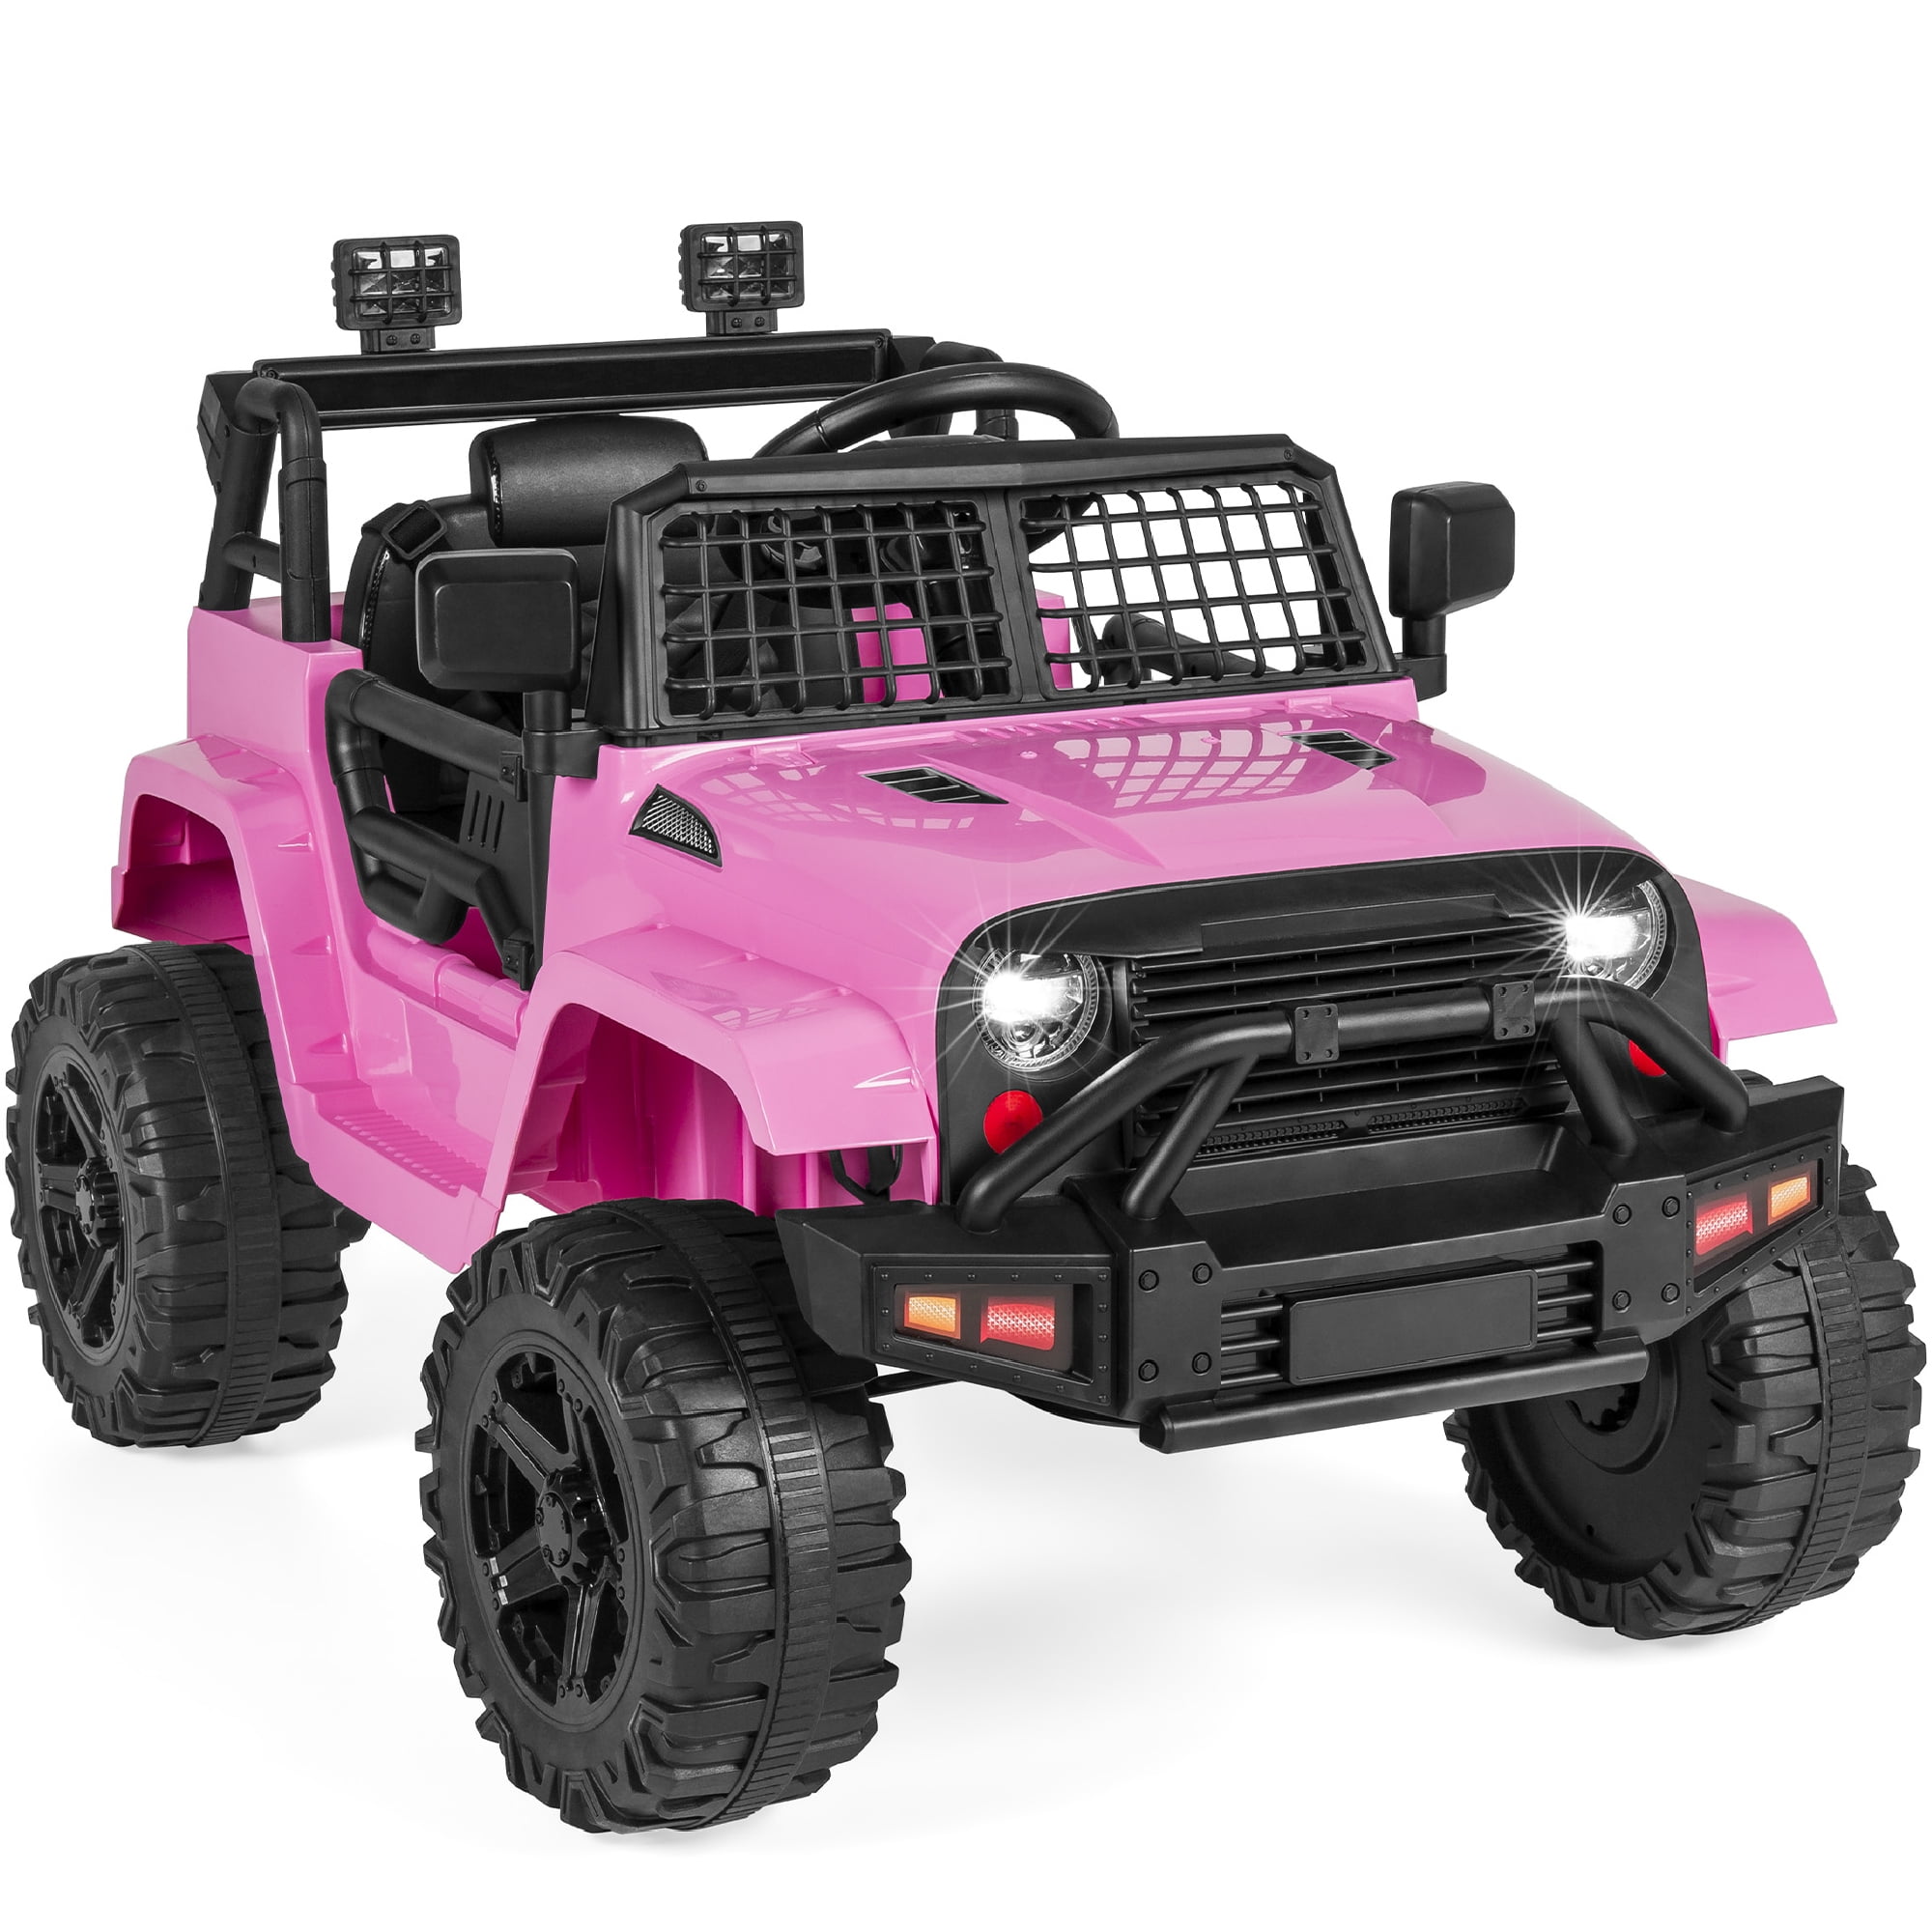 12V Kids SUV Ride On Car Toys Wheels Lights Music Safety Parent RC Control Pink 